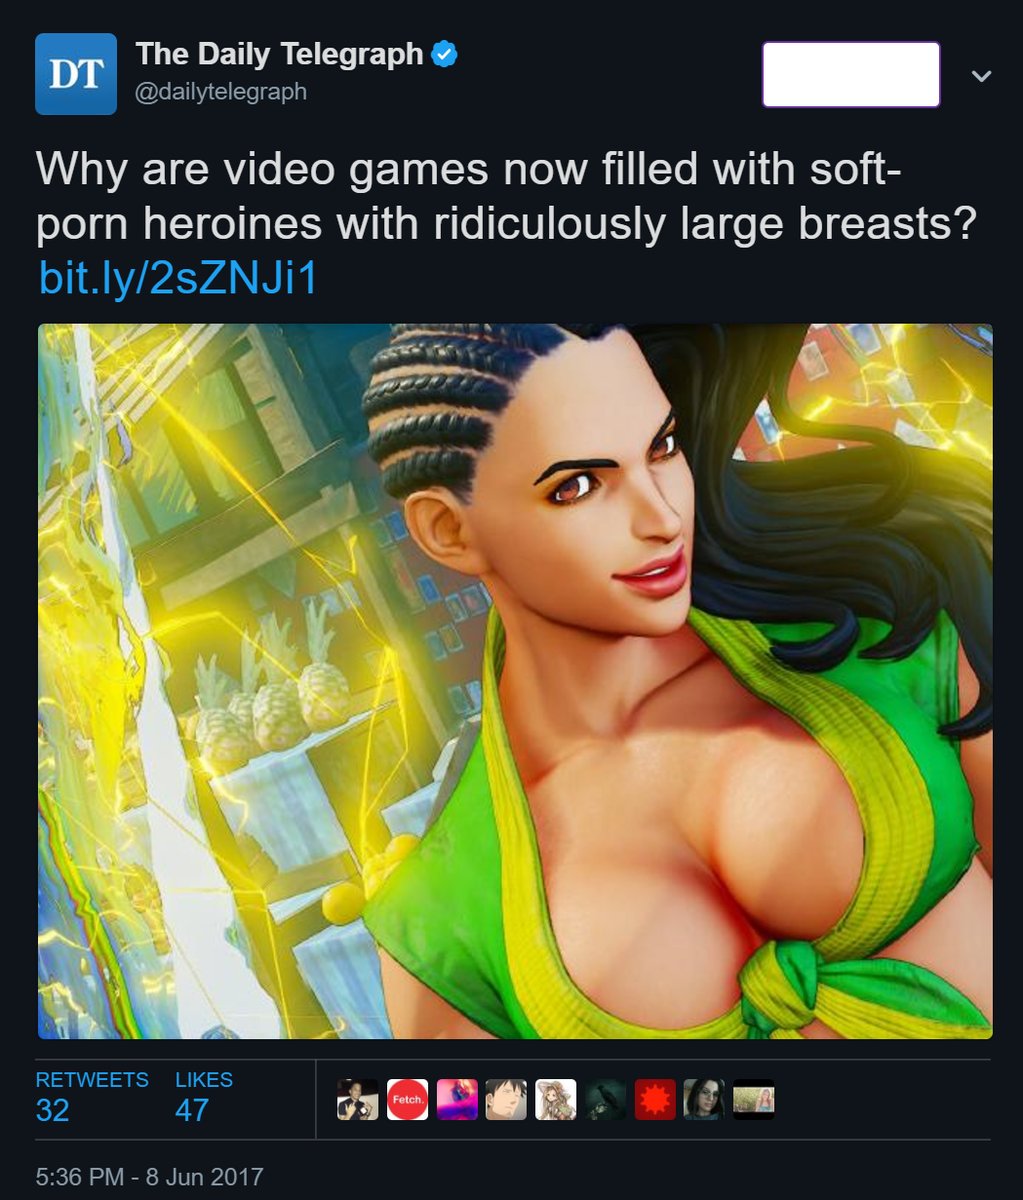 Tweet of someone complaining about the breast size of gaming characters that are female.